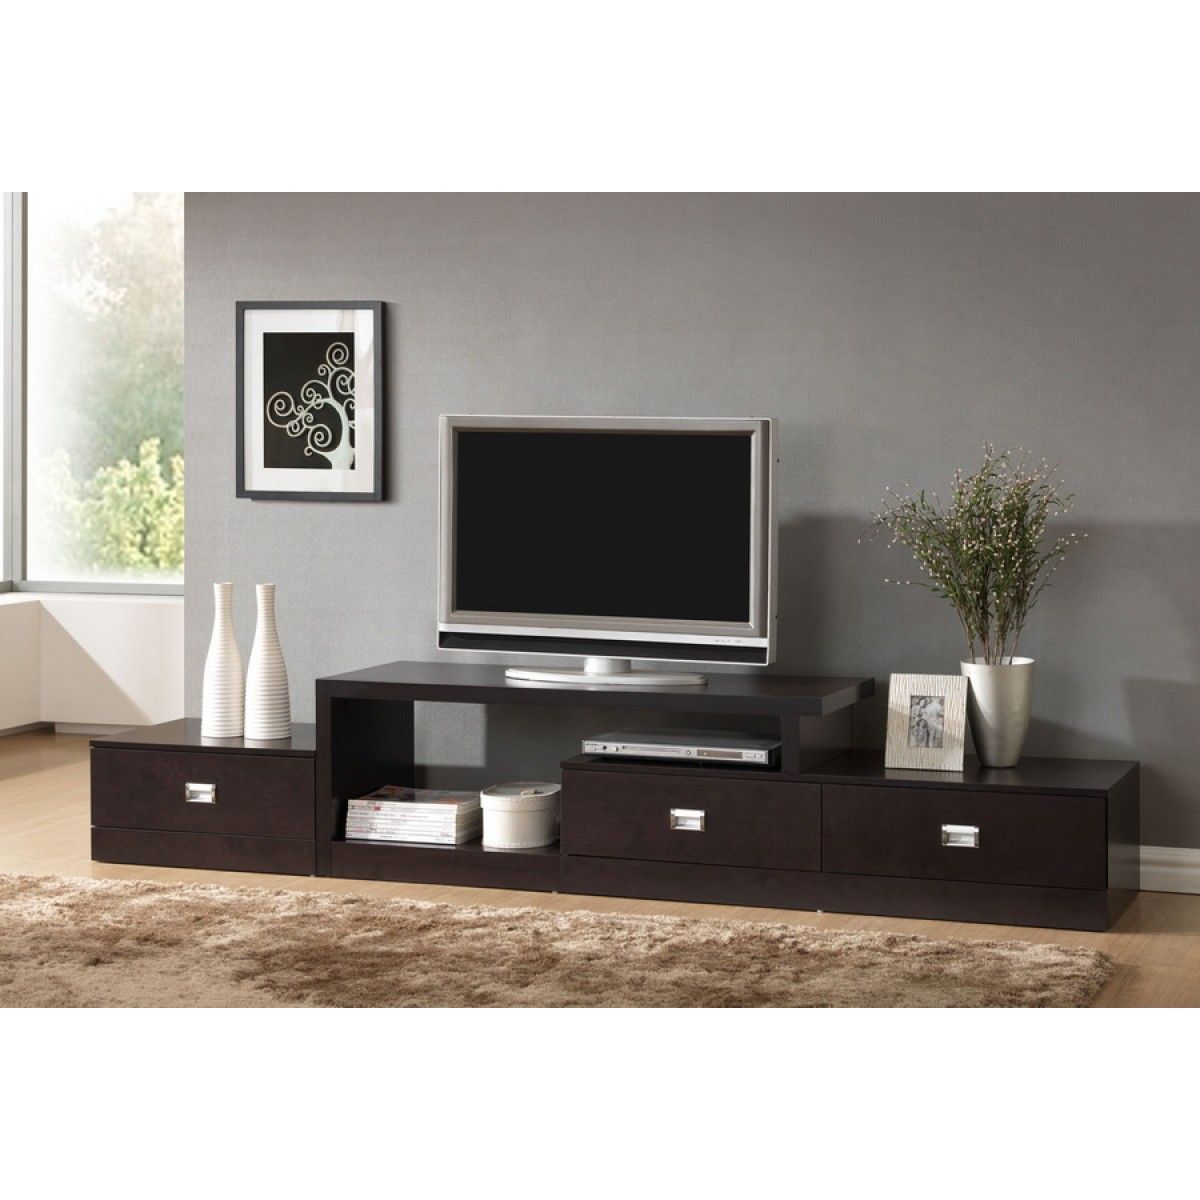 Marconi Brown Asymmetrical Modern Tv Stand | See White With Regard To Under Tv Cabinets (View 2 of 15)